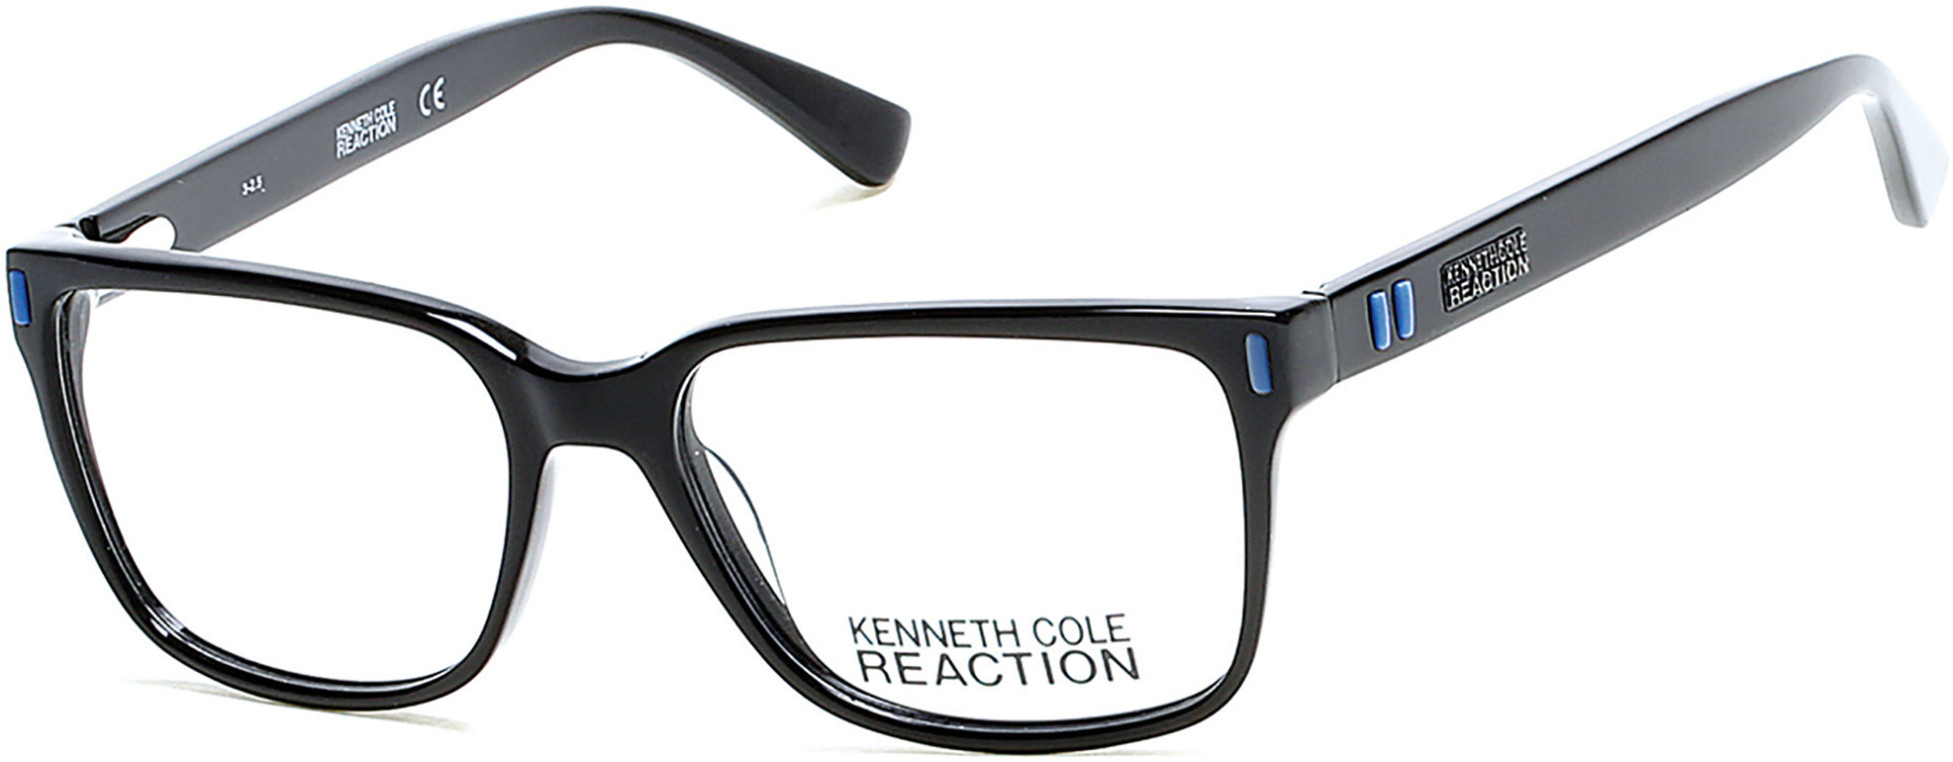 KENNETH COLE NY 0786